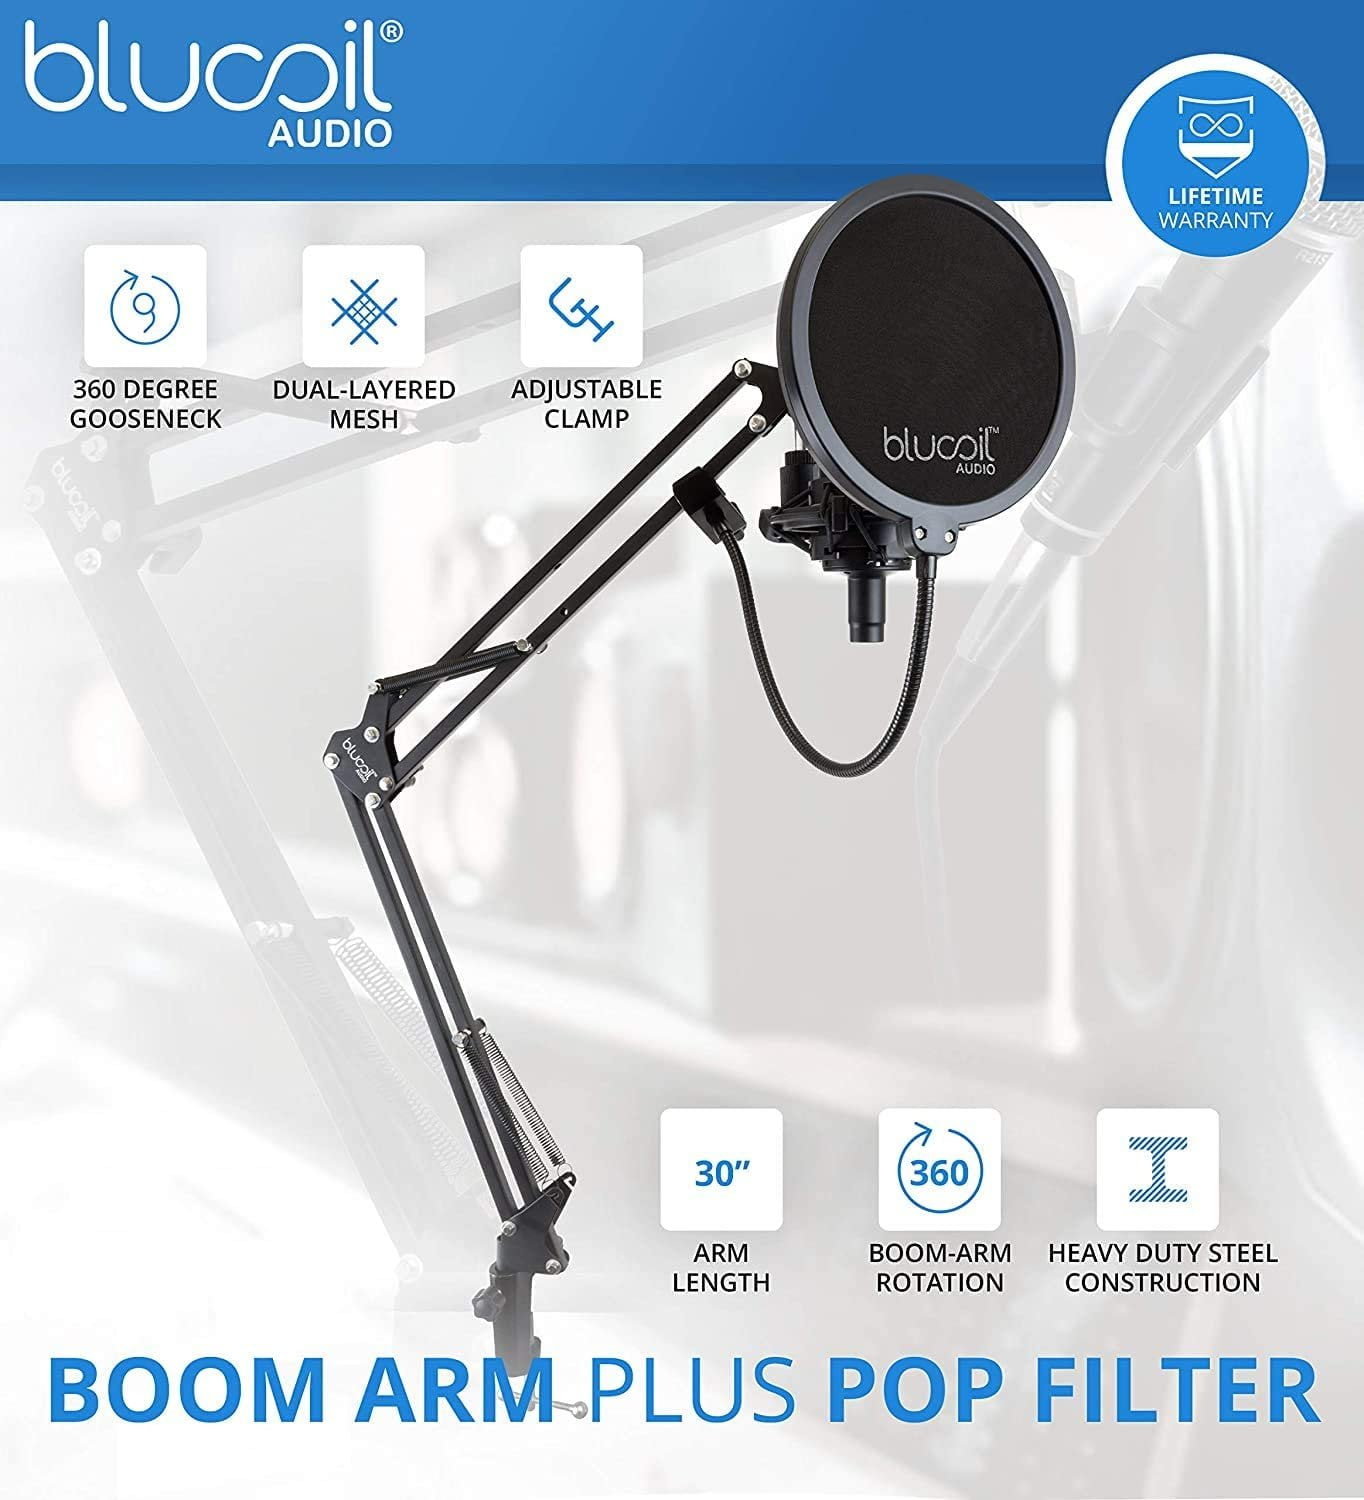 and 10-FT Balanced XLR Cable Blucoil Boom Arm Plus Pop Filter PreSonus AudioBox USB 96 25th Anniversary Audio Interface for Windows and Mac Bundle with MXL 770 Cardioid Condenser Microphone Silver 